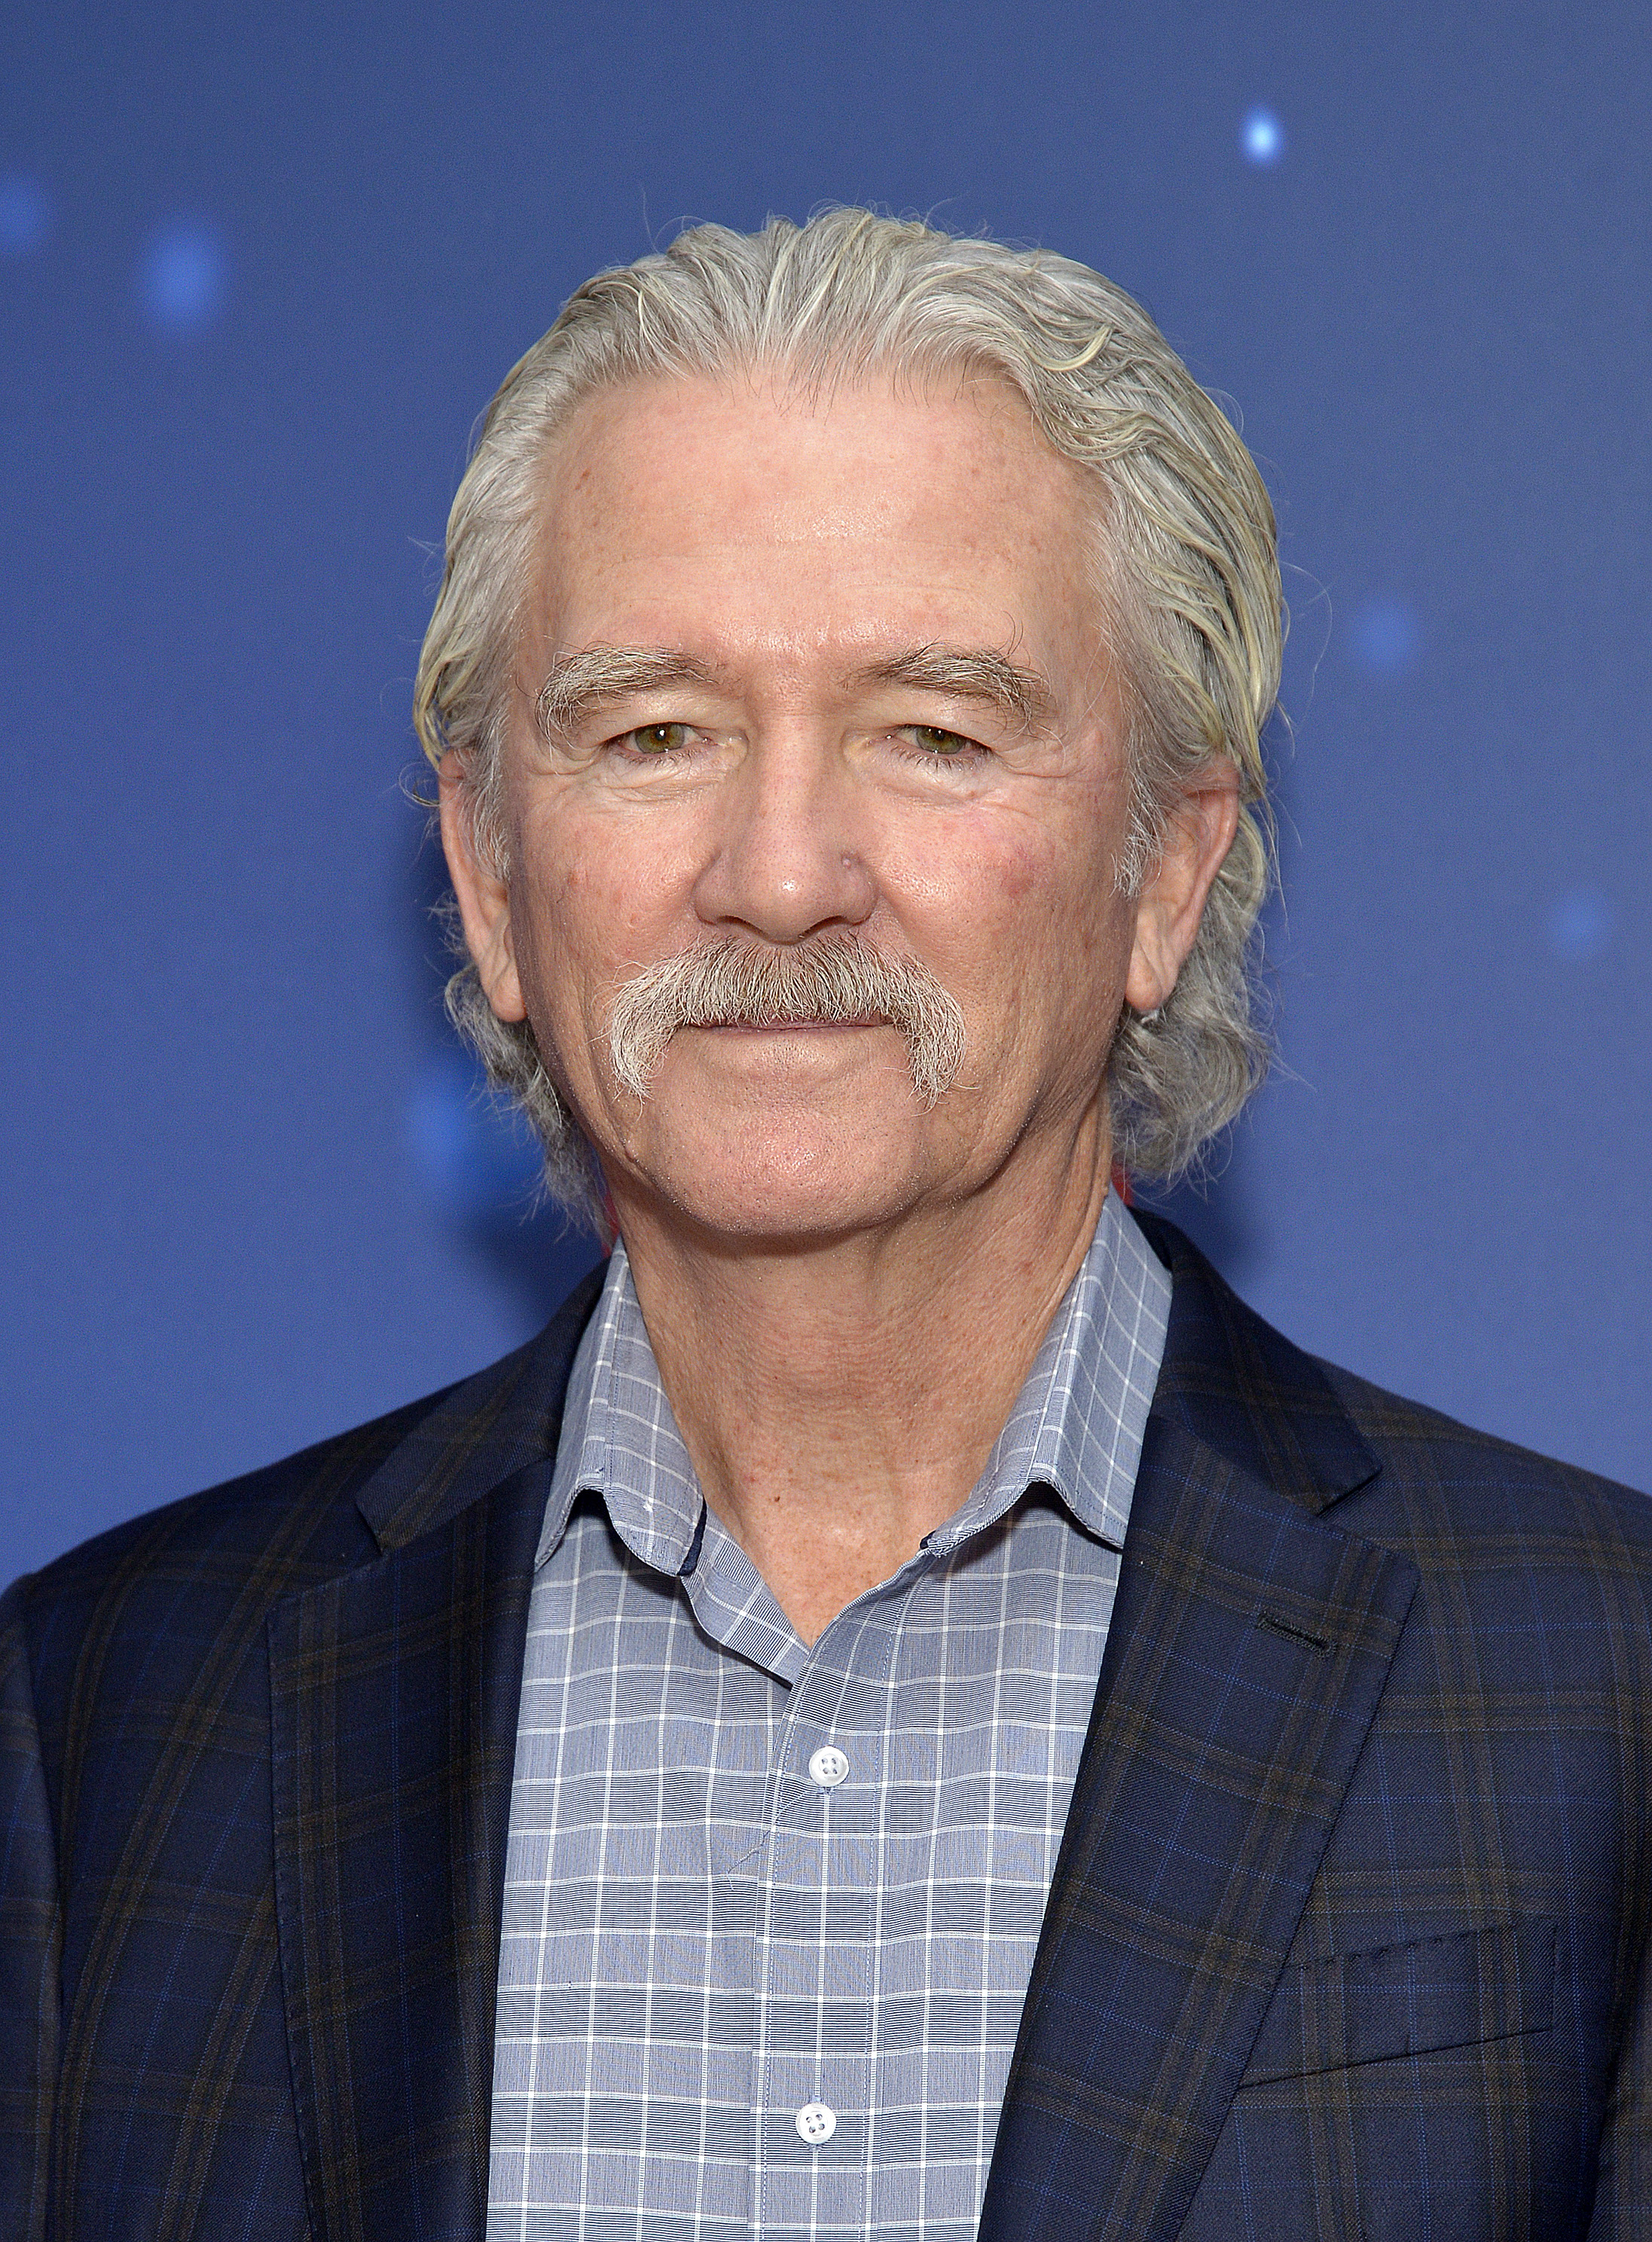 Patrick Duffy attends Say "Santa!" with It's A Wonderful Lifetime photo experience at Glendale Galleria on November 09, 2019 in Glendale, California | Source: Getty Images